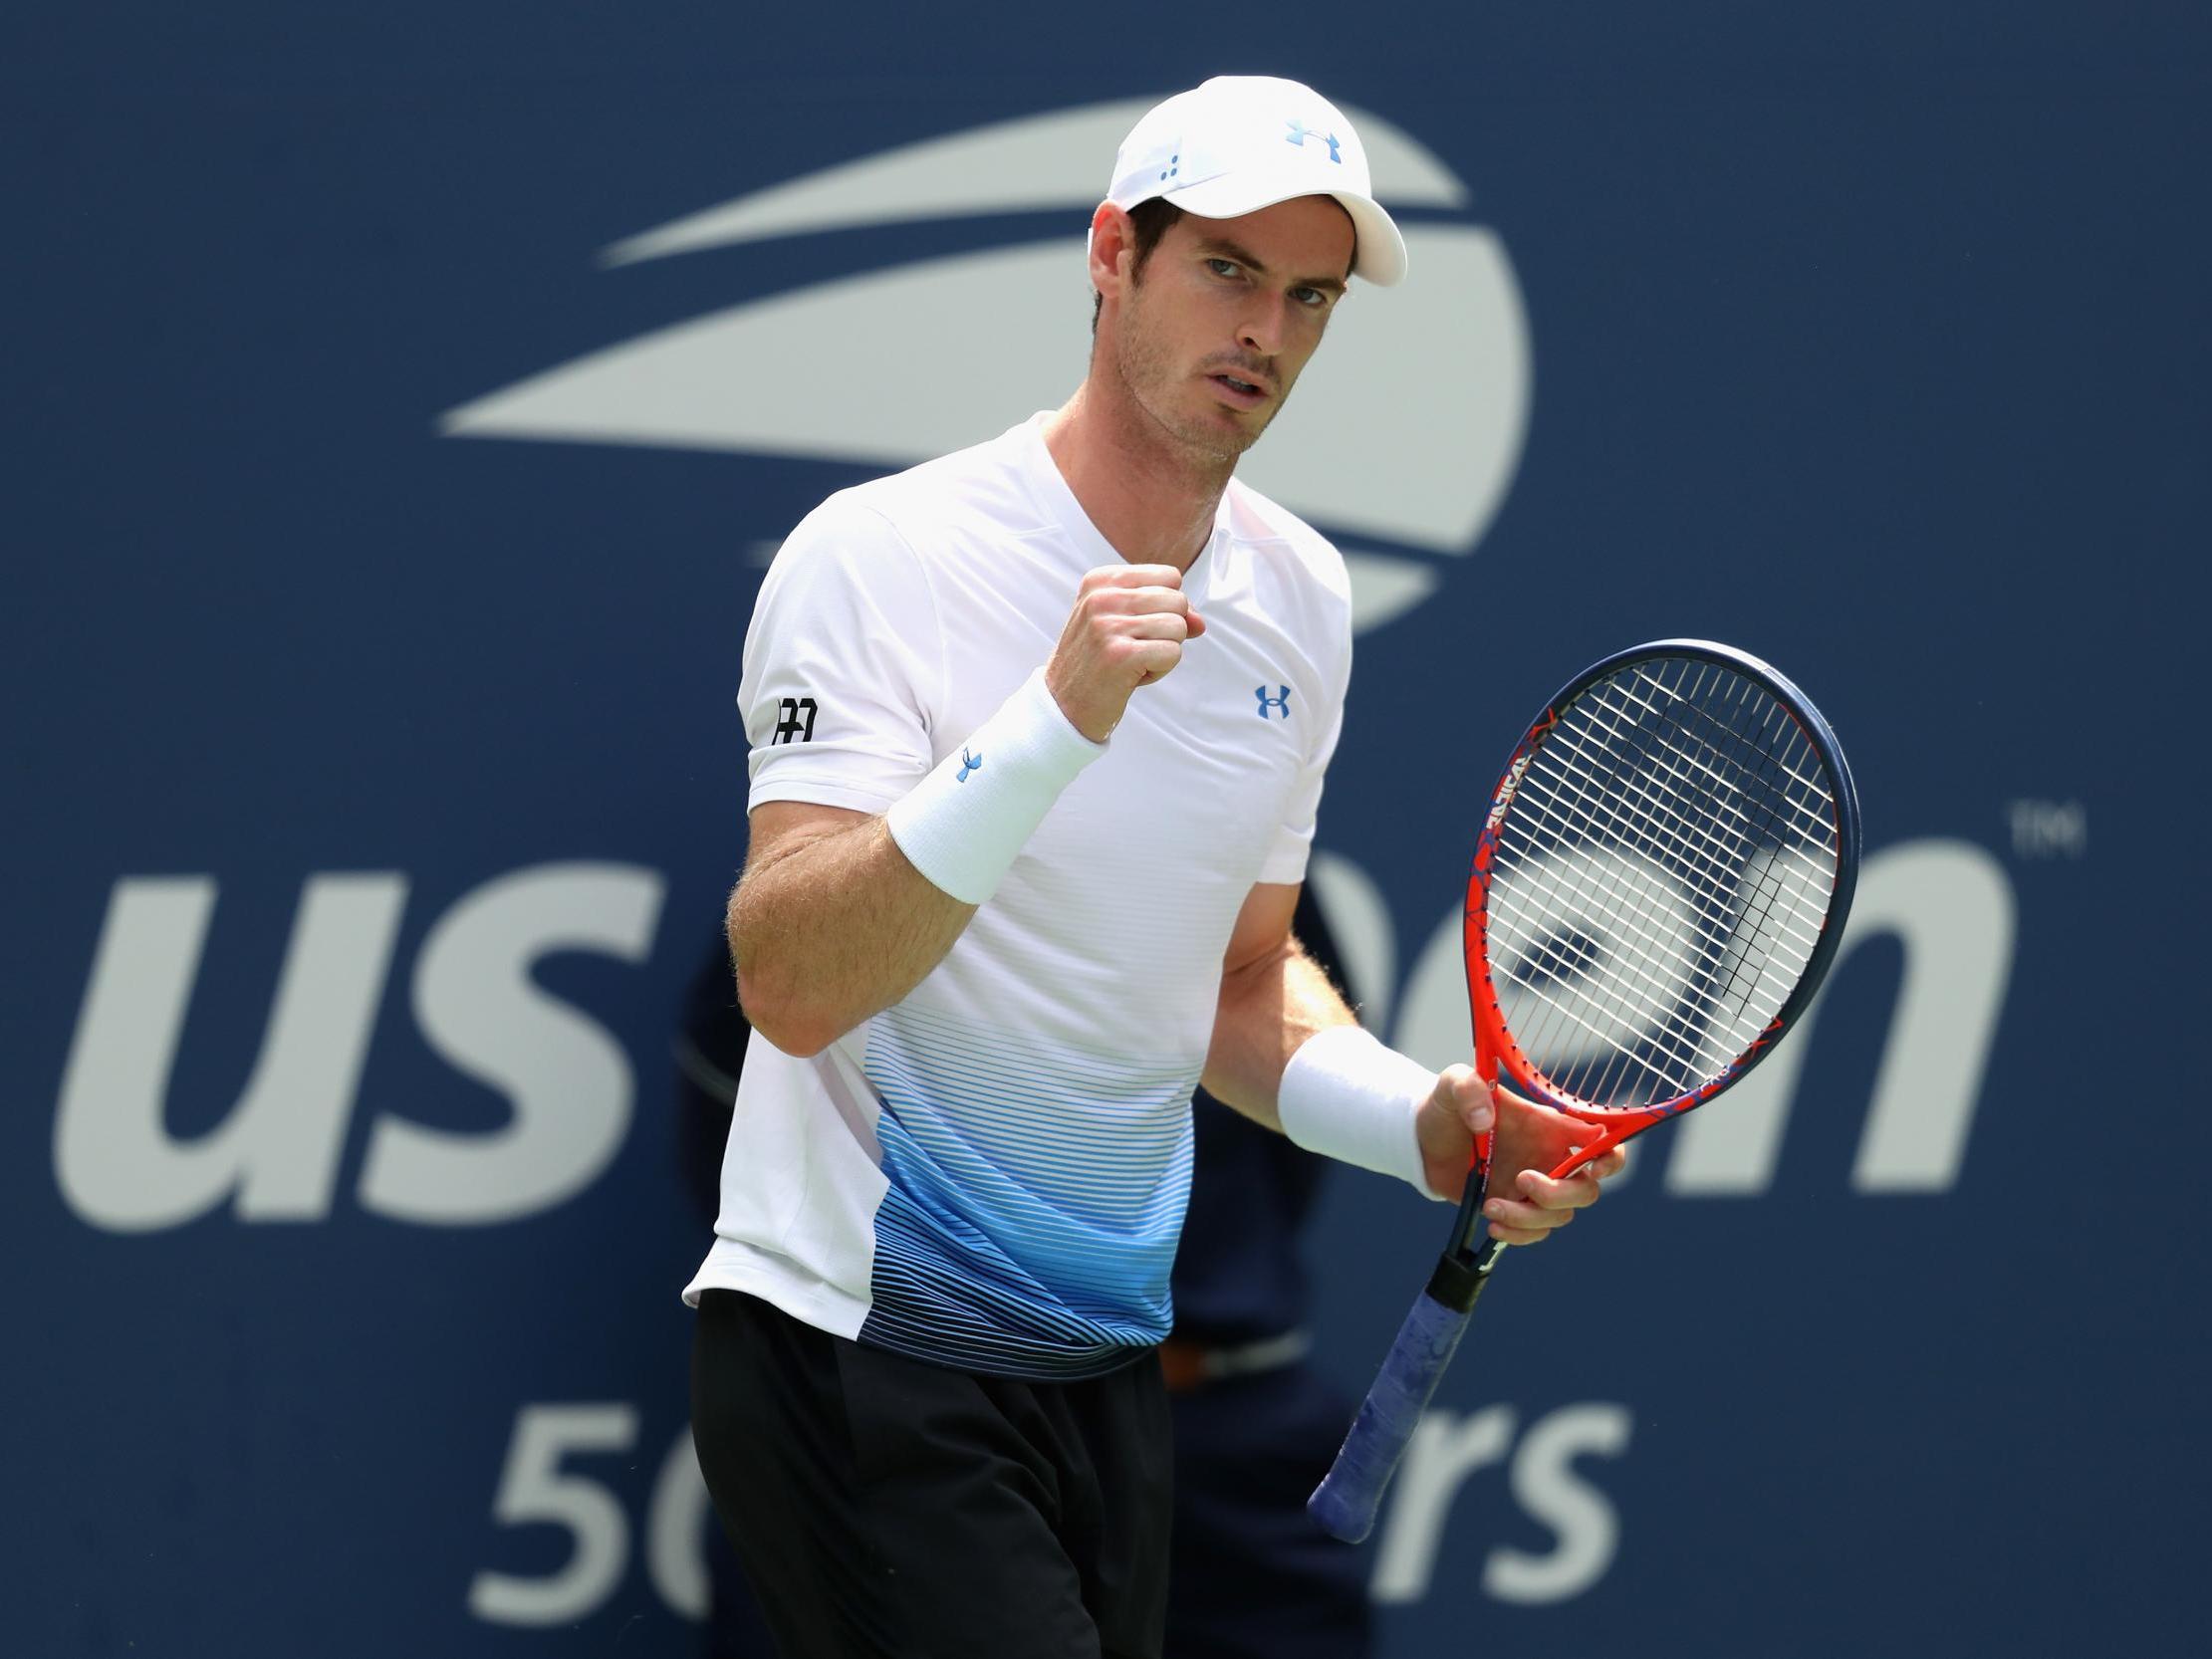 Andy Murray was beaten in the second round of the US open in his first Grand Slam for 14 months